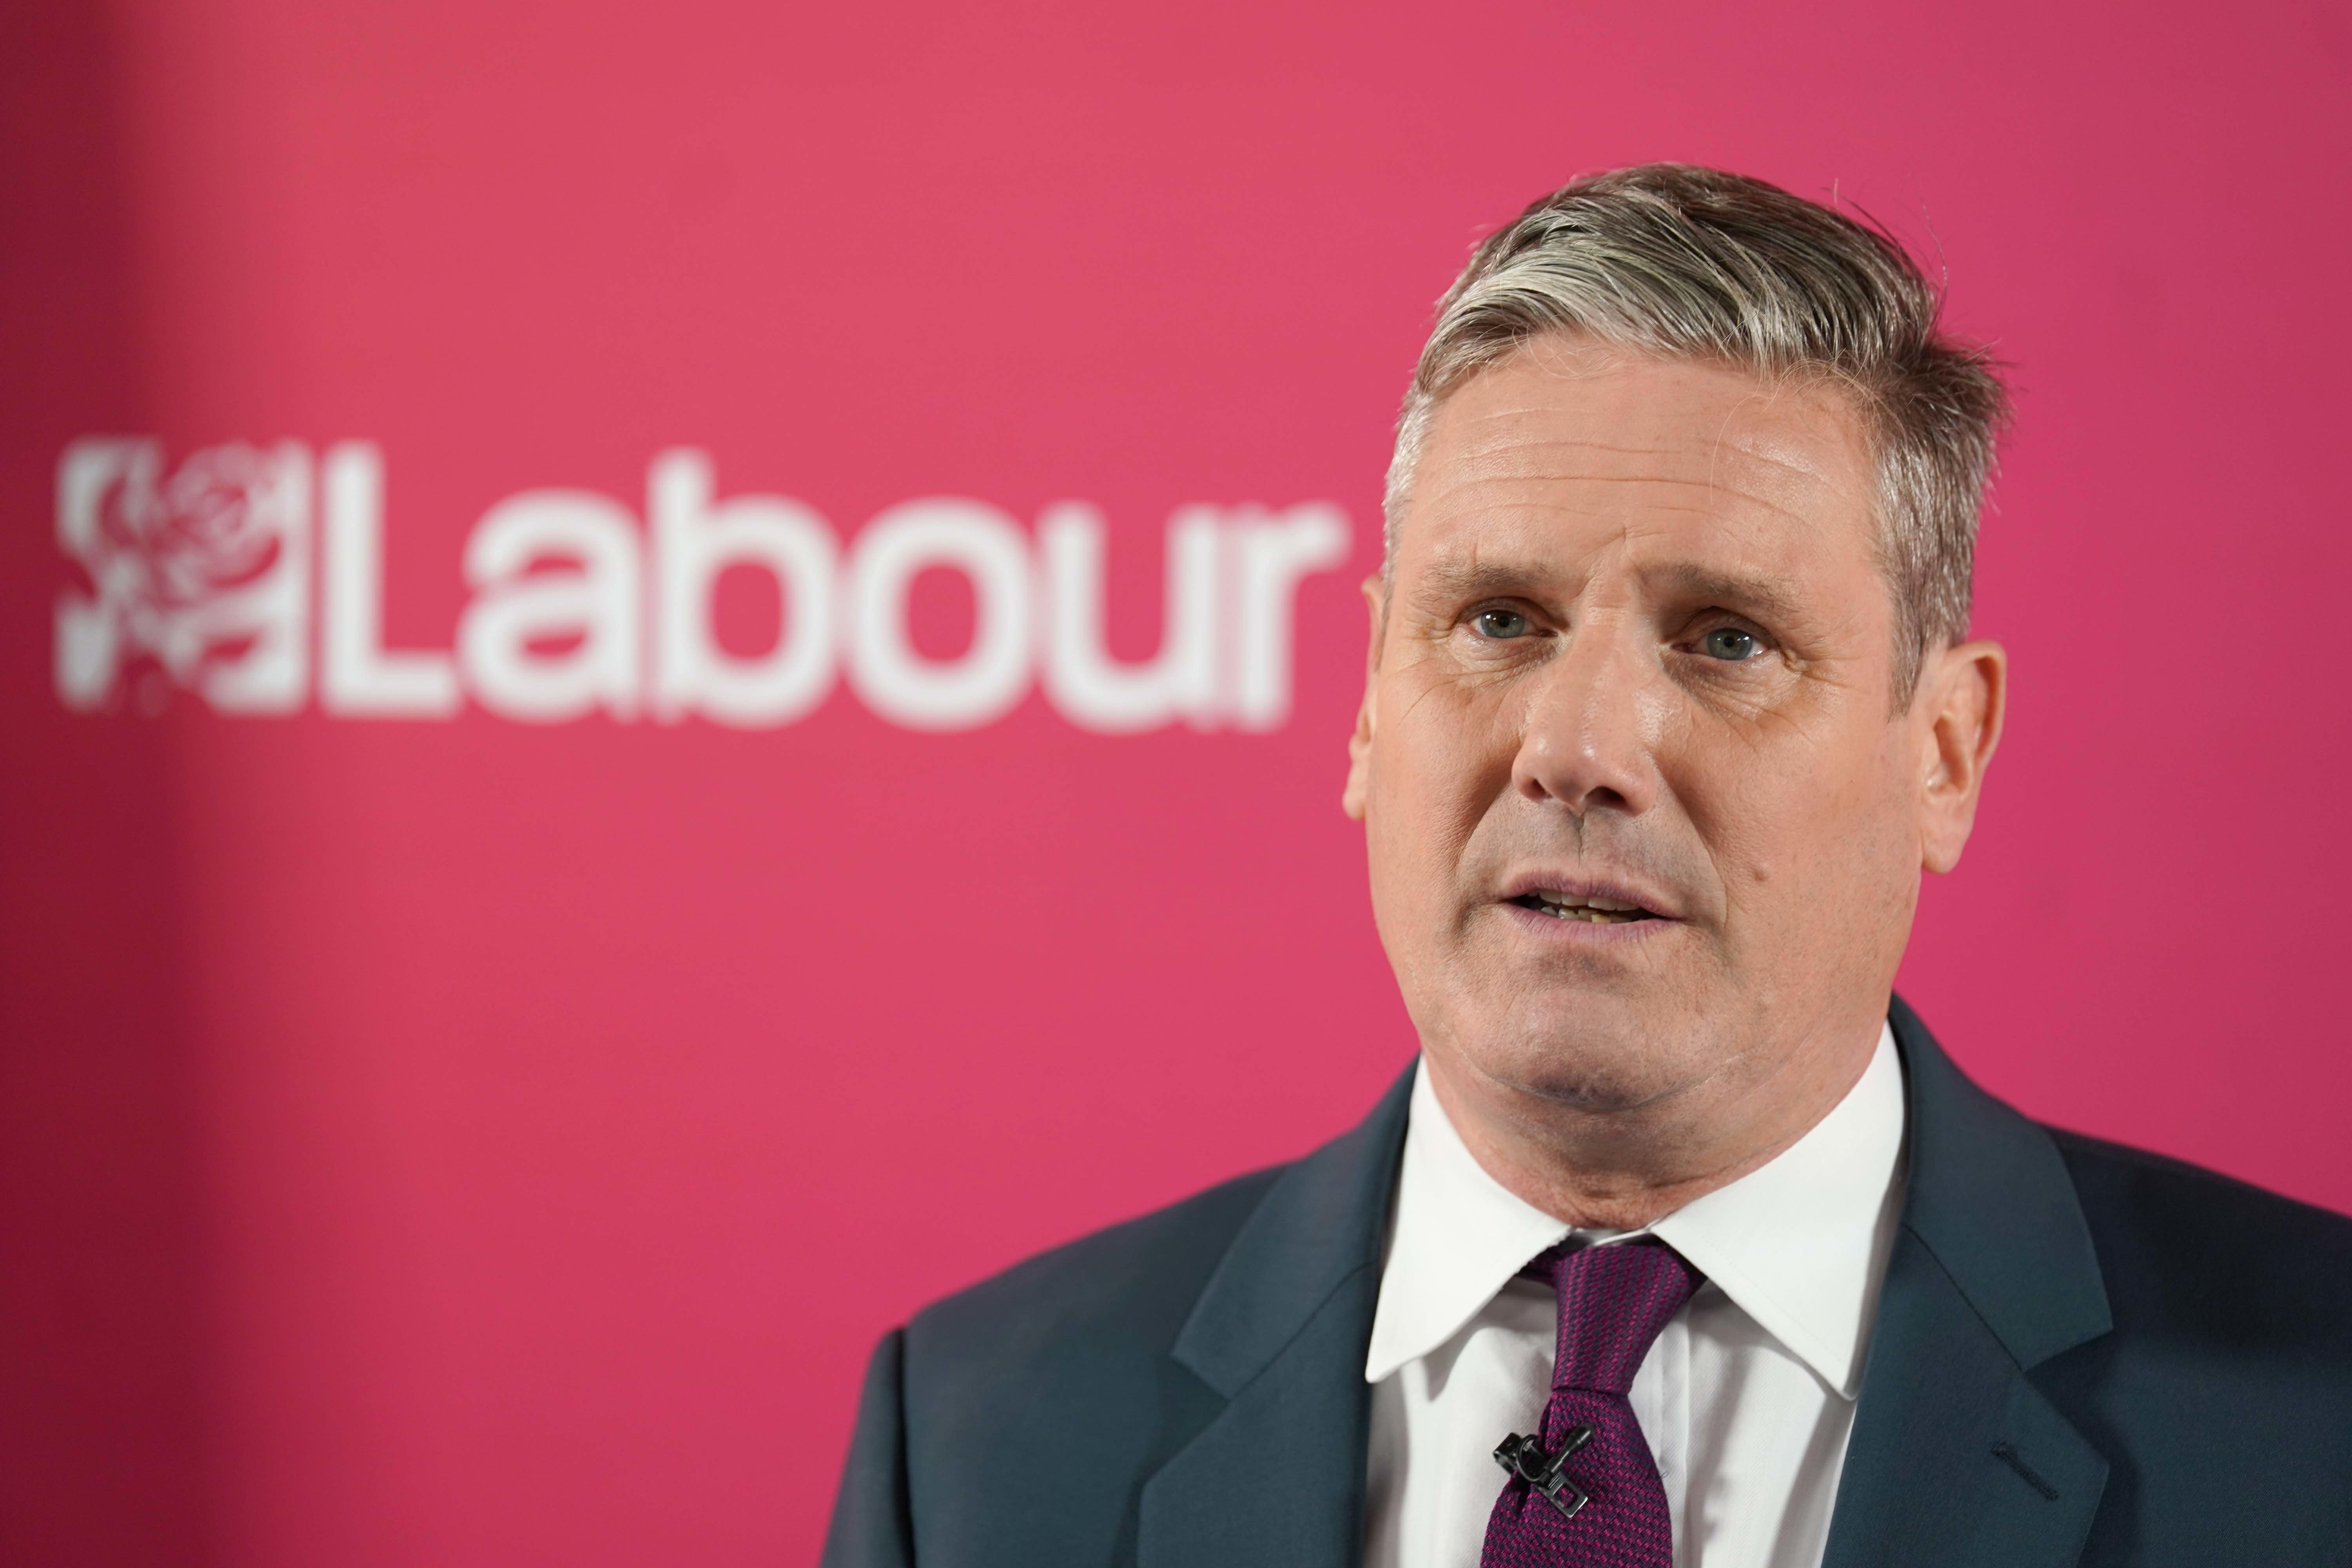 Labour leader Sir Keir Starmer stood by previous versions of the advert (Kirsty O’Connor/PA)